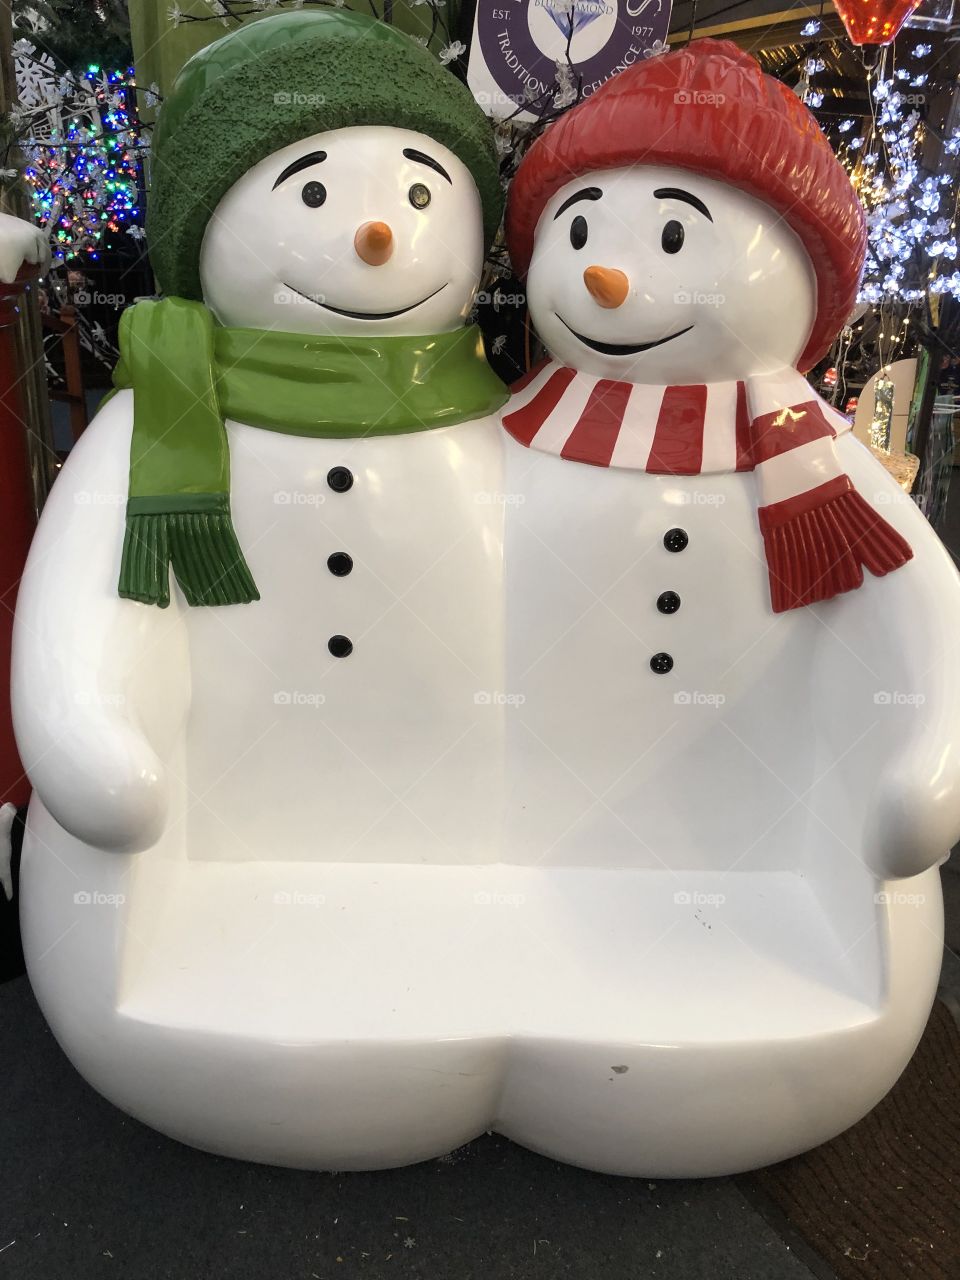 I found these snow men very amusing and they have a dual purpose in that they made me smile and are a great resting place as well.